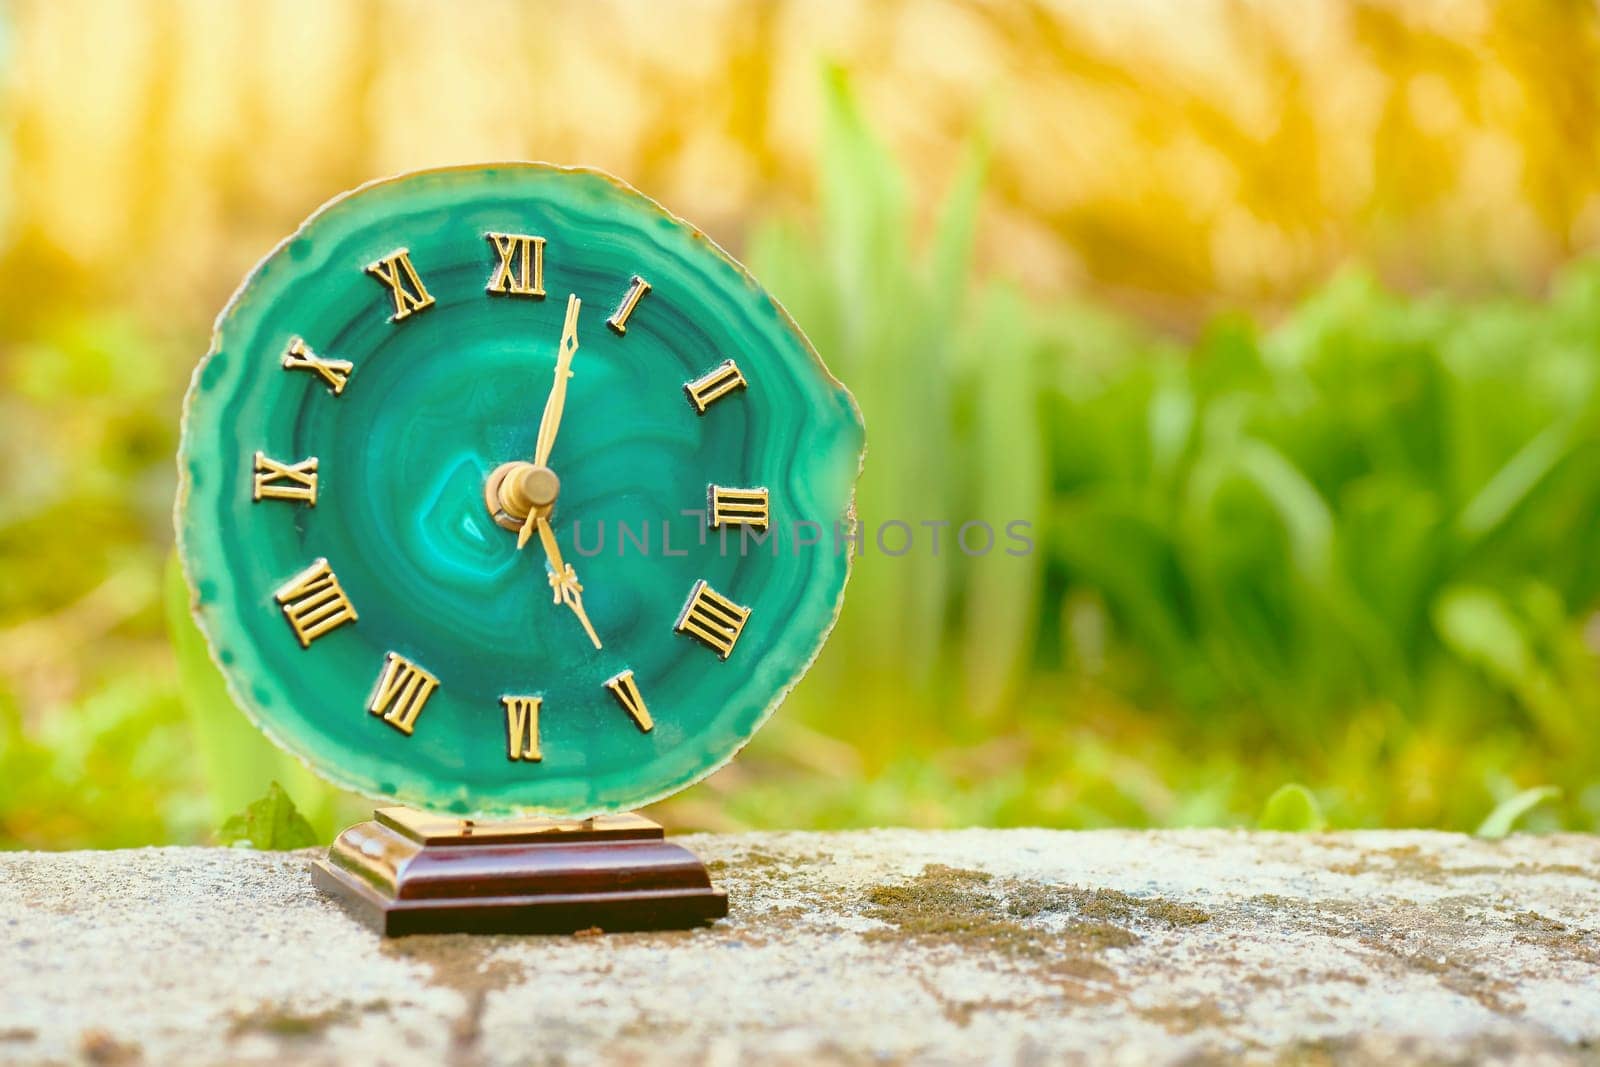 Clock with emerald dial. Gold numbers and arrows. Old stone among greenery by jovani68